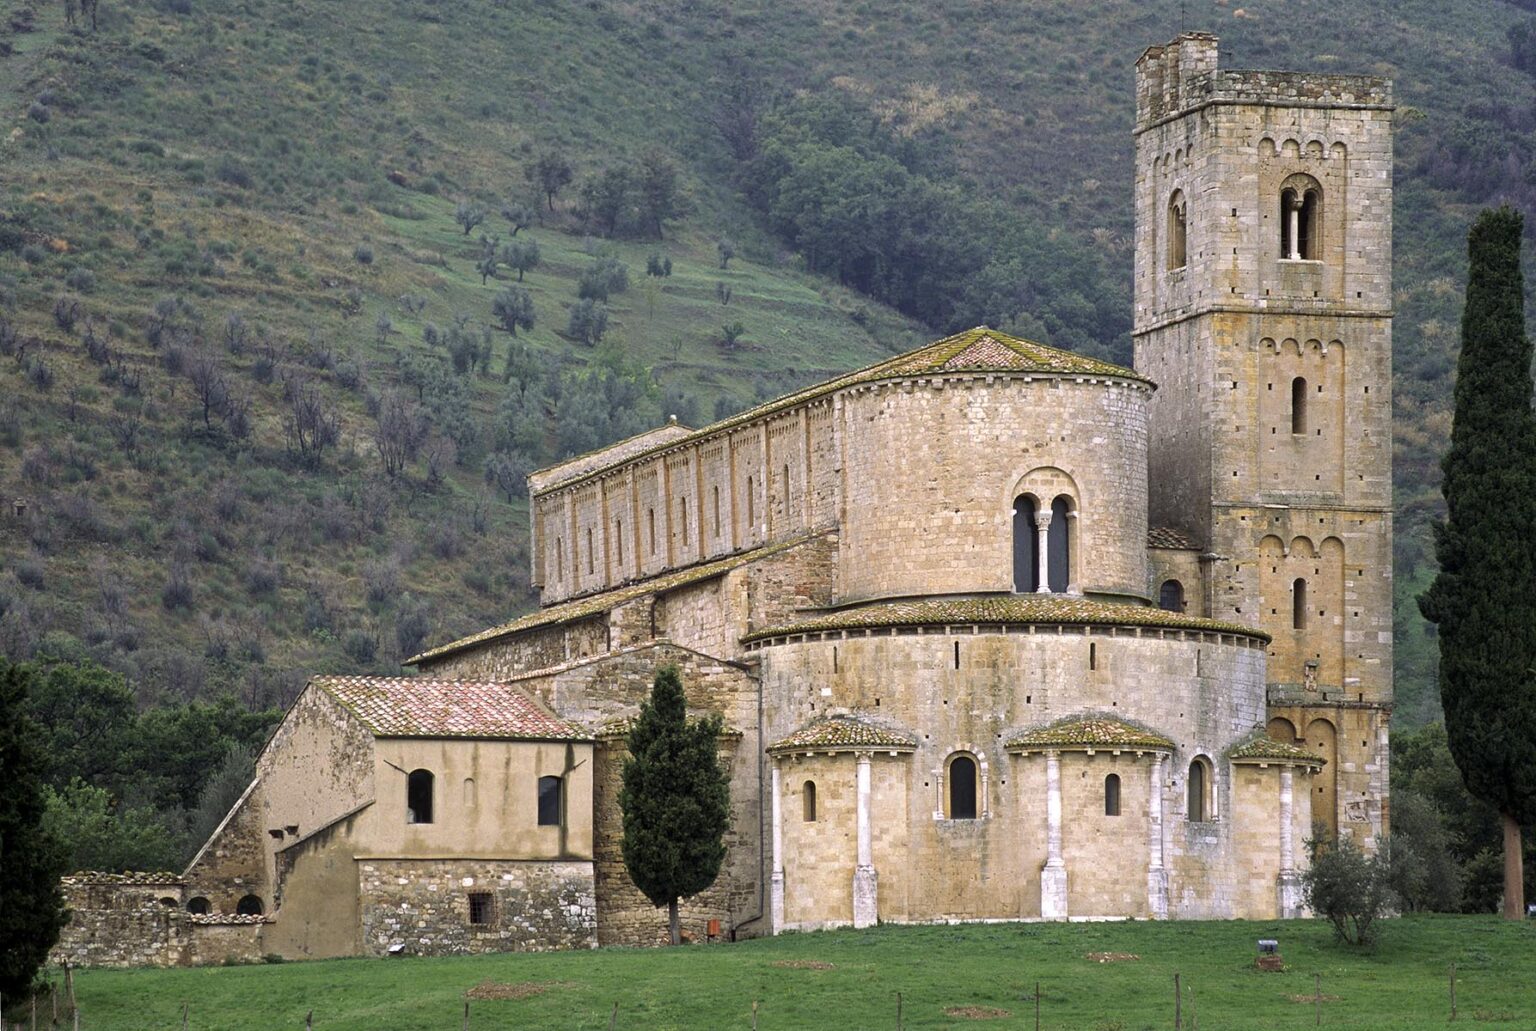 The mystical Romanesque CHURCH OF SANT' ANTIMO near the town of CASTELNUOVO DELL' ABATE - TUSCANY